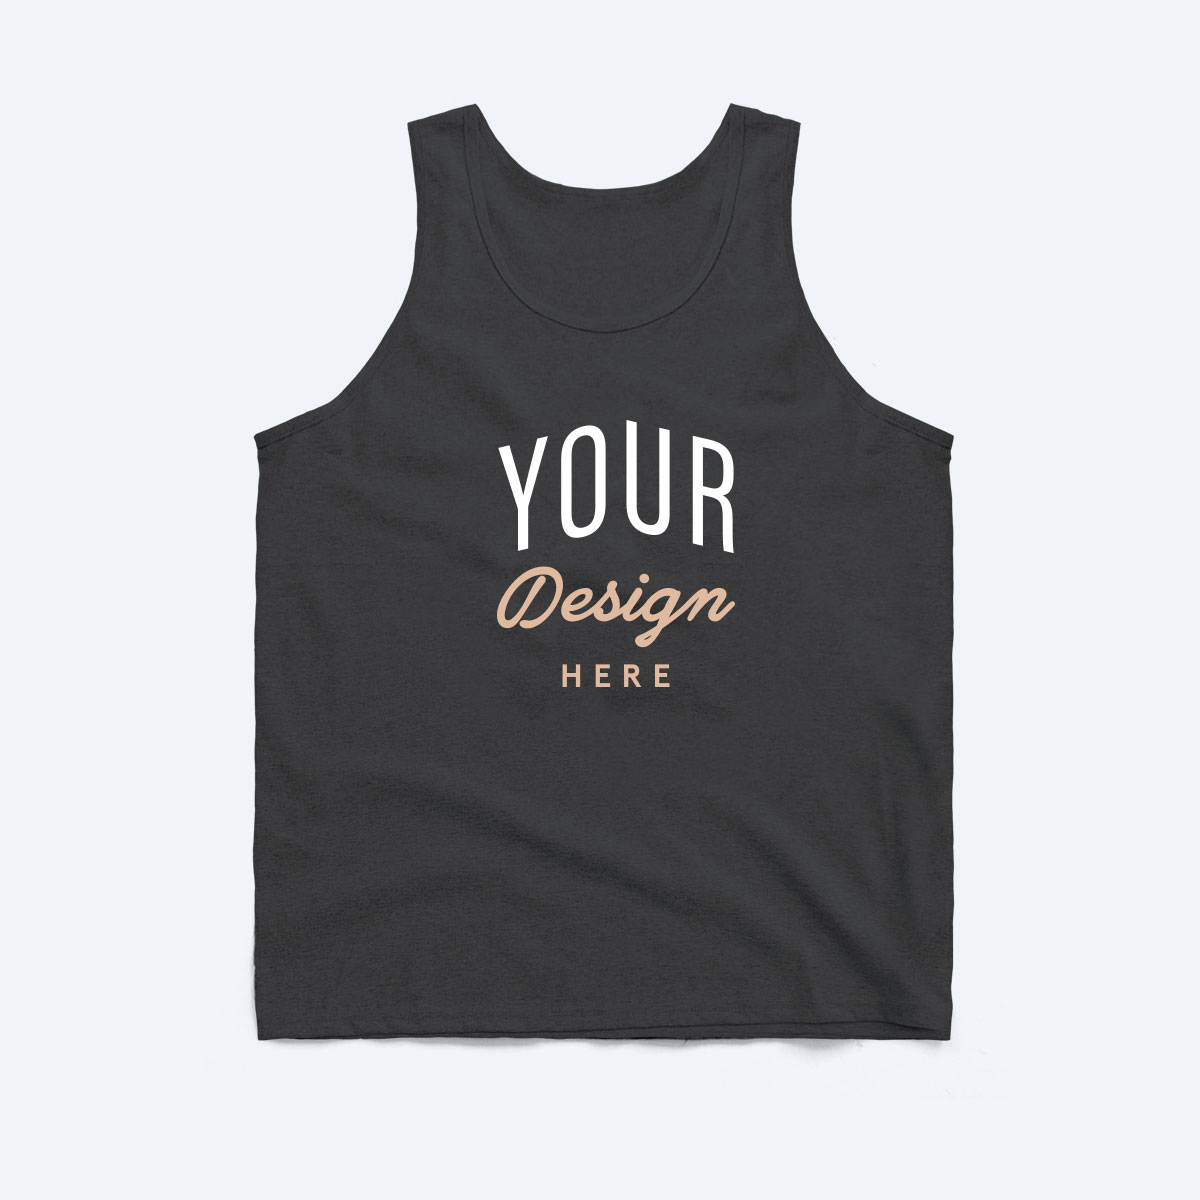 Spring-Summer funny shirt Cadeaux Classic unisex tank top It's Better Without Sleeves Sizes XS 2 XL Birthdays